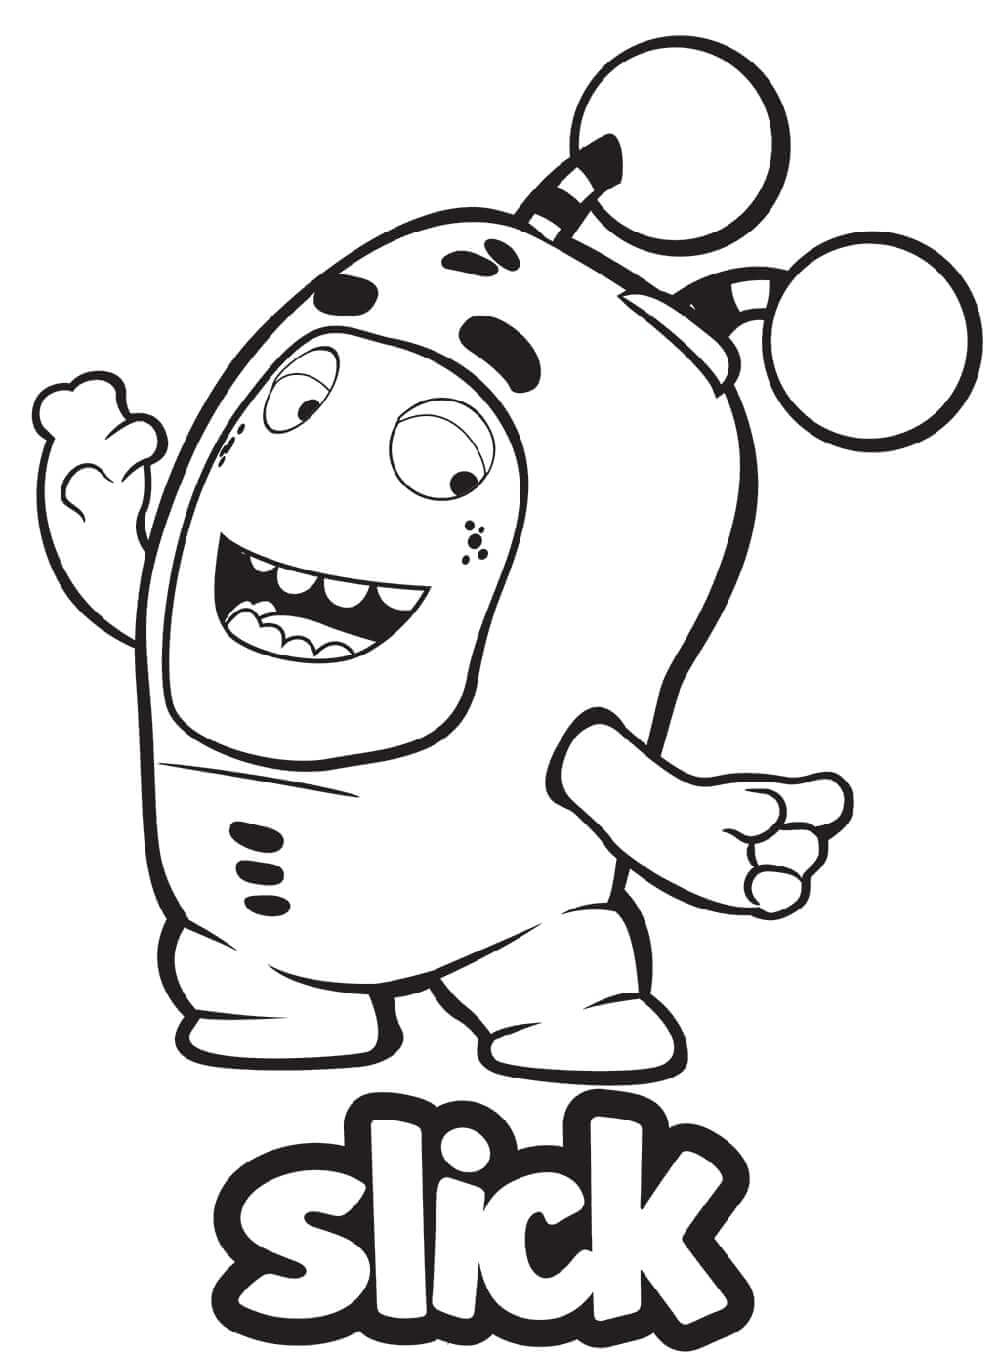 Slick Oddbods Coloring Page Free Printable Coloring Pages for Kids